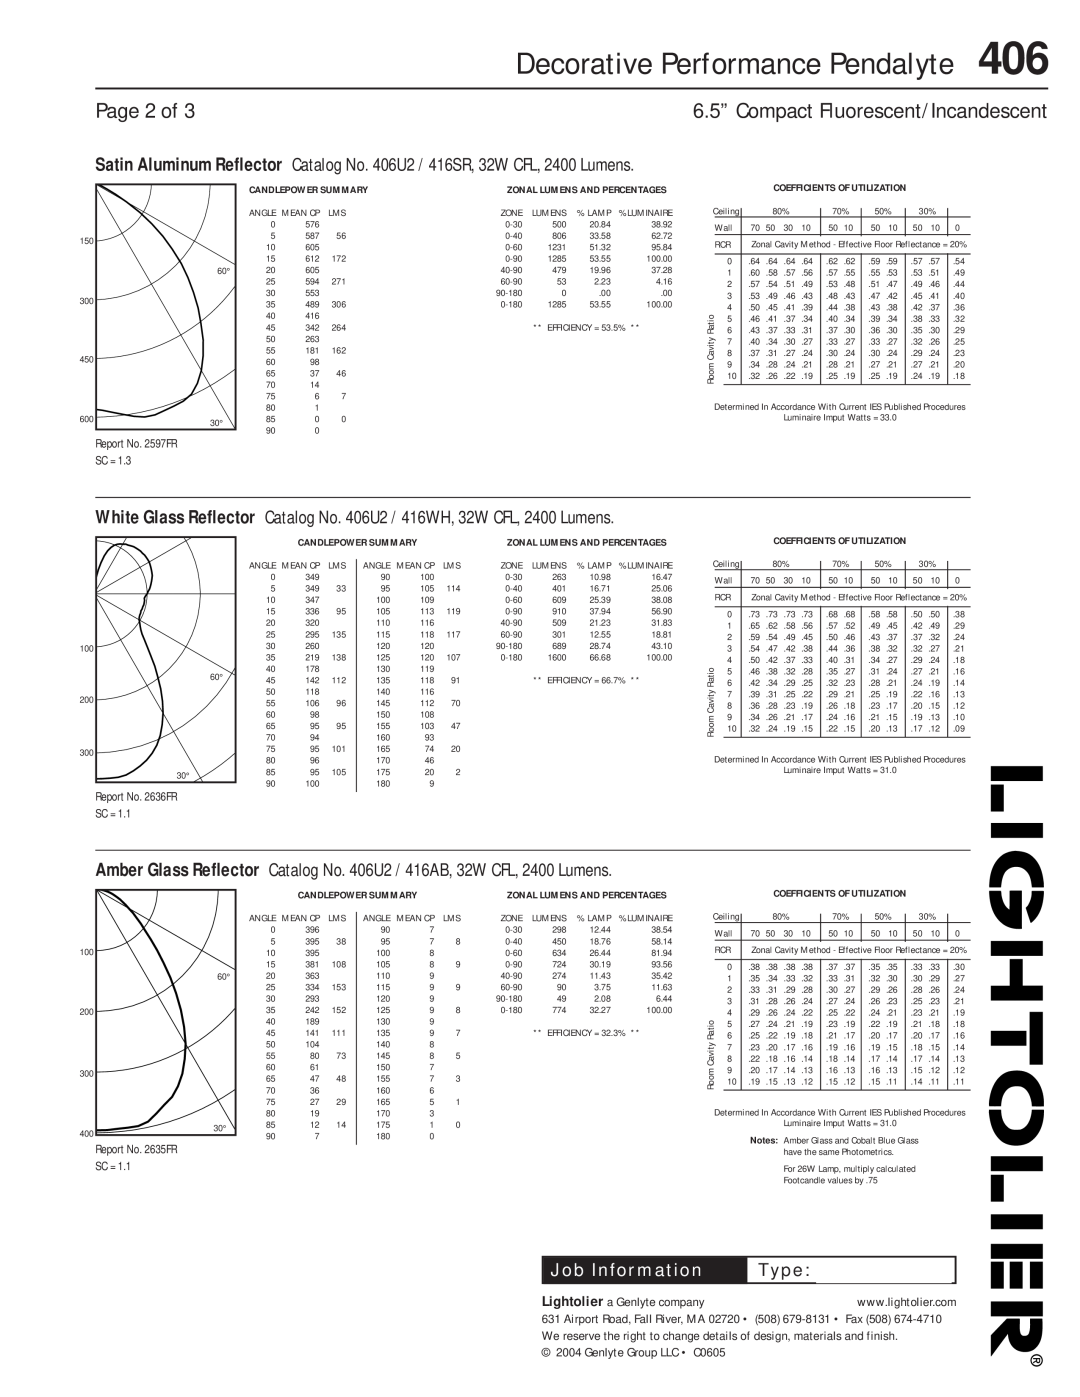 Lightolier 406 dimensions Page 2 of, Decorative Performance Pendalyte, Type 